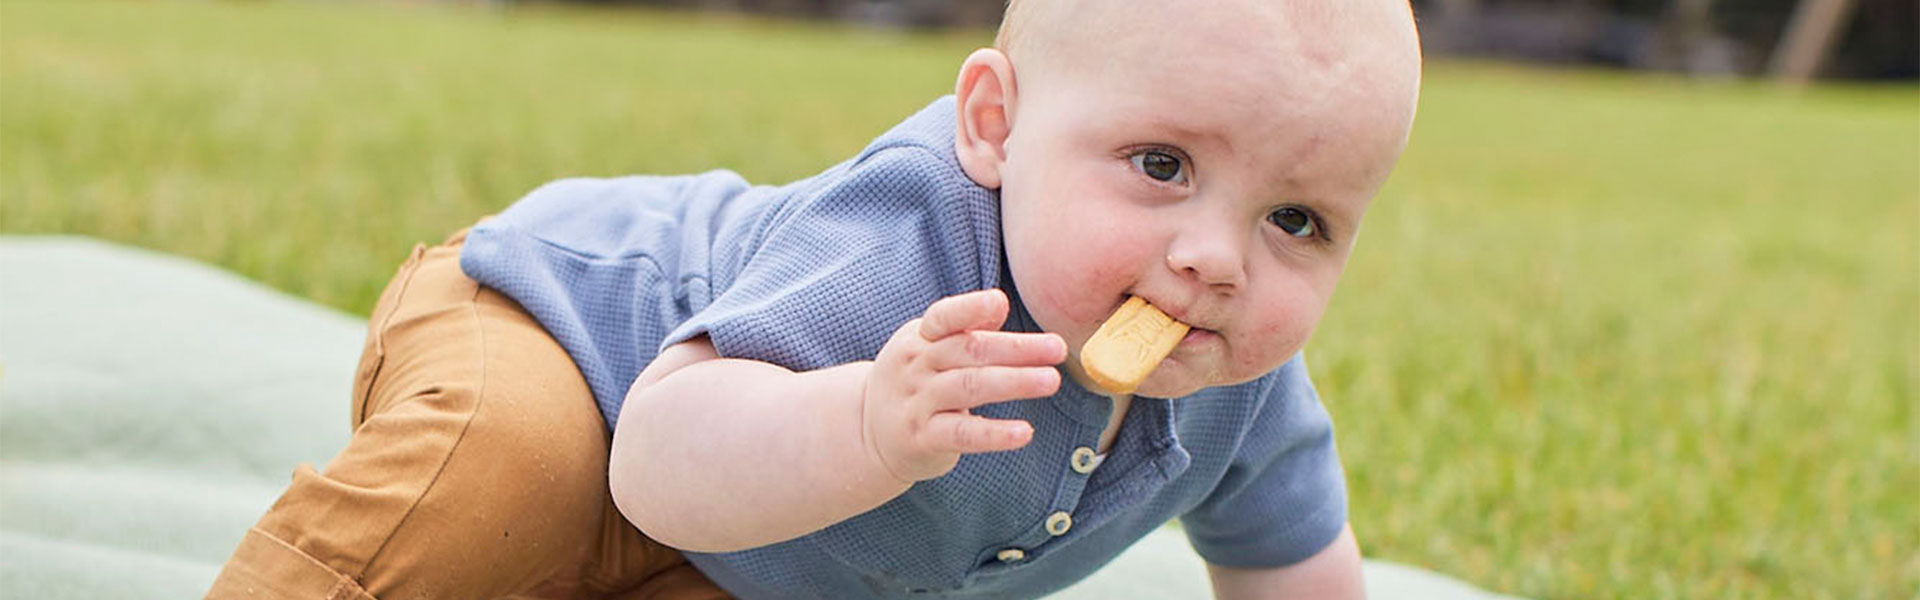 Baby eating a biscuit on a blanket